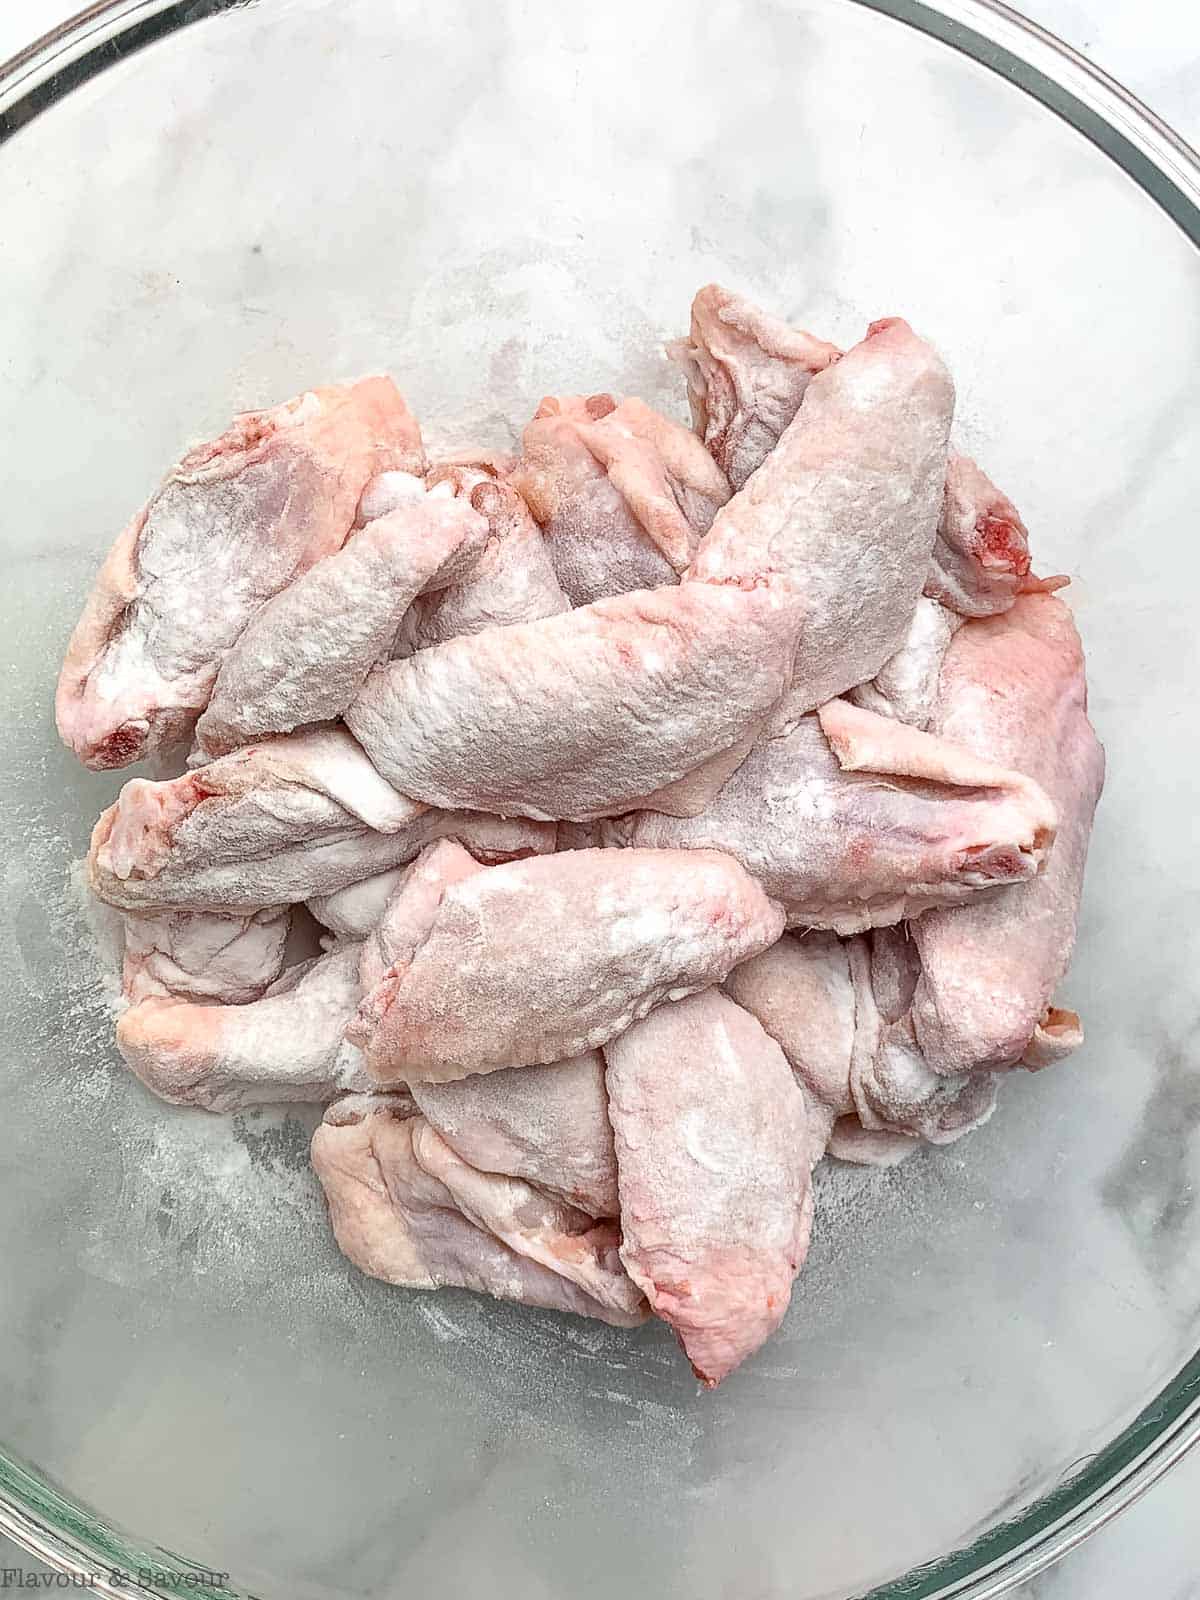 Raw chicken wings in a bowl with baking powder.